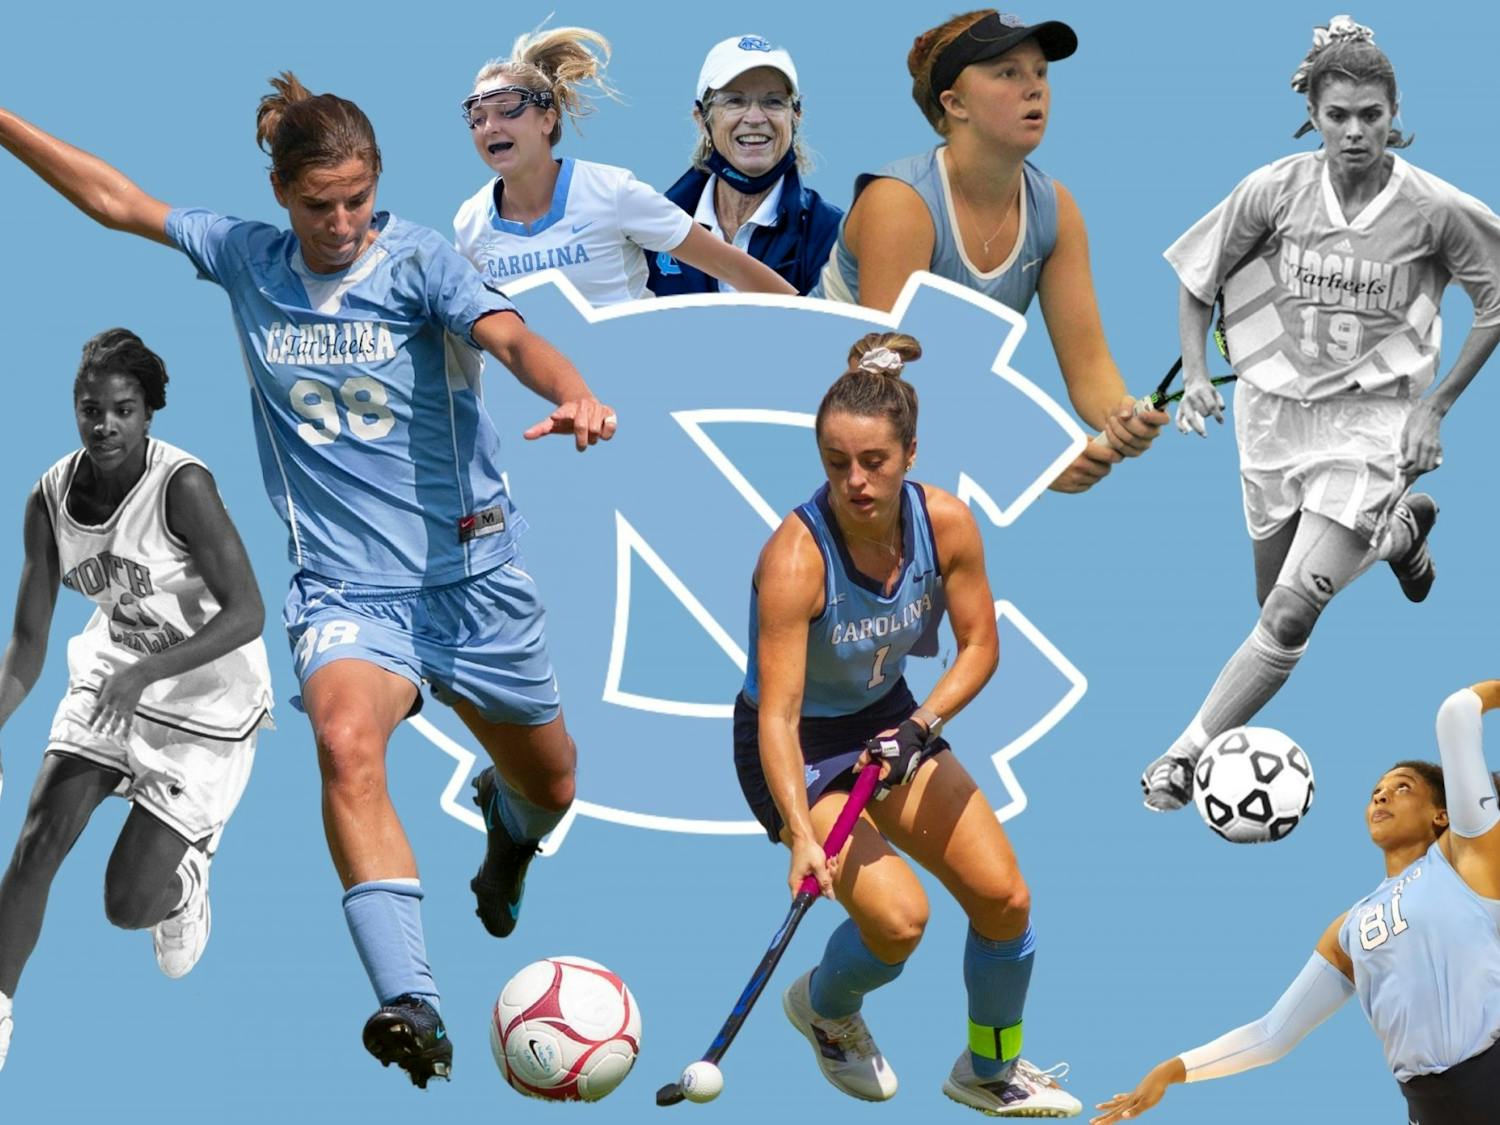 Graphic by Ira Wilder. Photos by Abe Loven, Brianna Ladd and Ira Wilder and courtesy of UNC Athletics and Dana Gentry. 